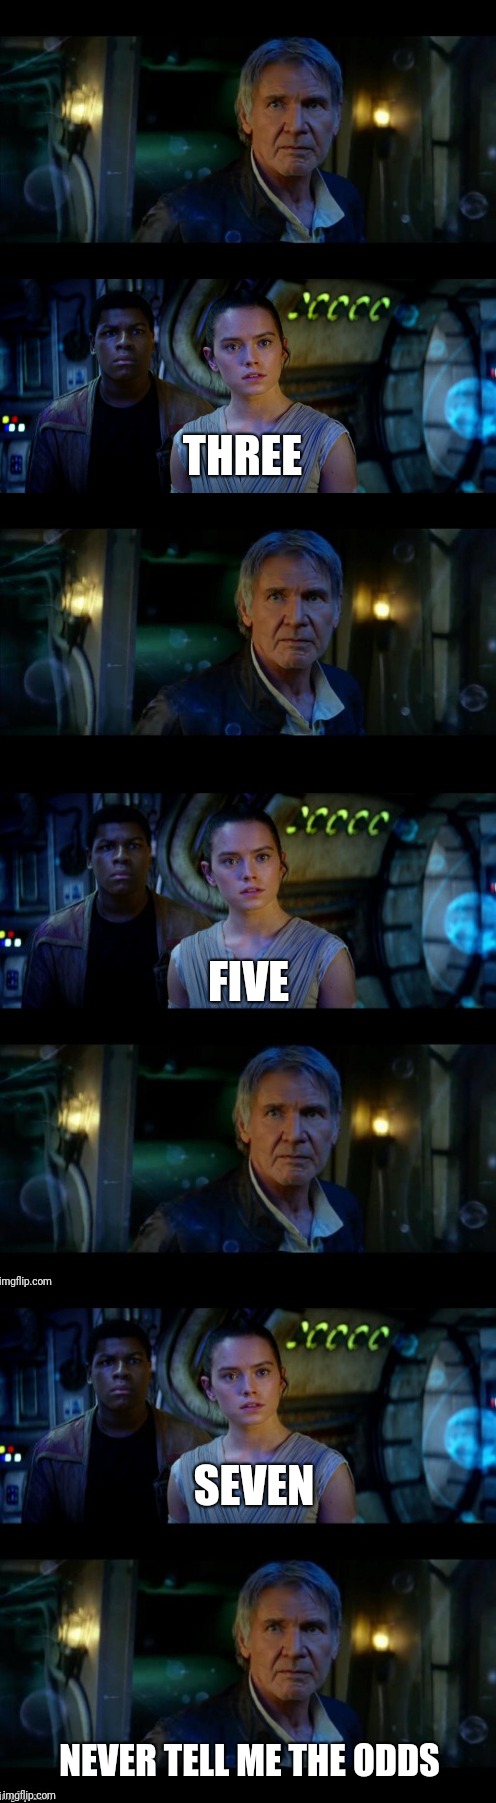 Star Wars Numberwang | THREE; FIVE; SEVEN; NEVER TELL ME THE ODDS | image tagged in star wars | made w/ Imgflip meme maker